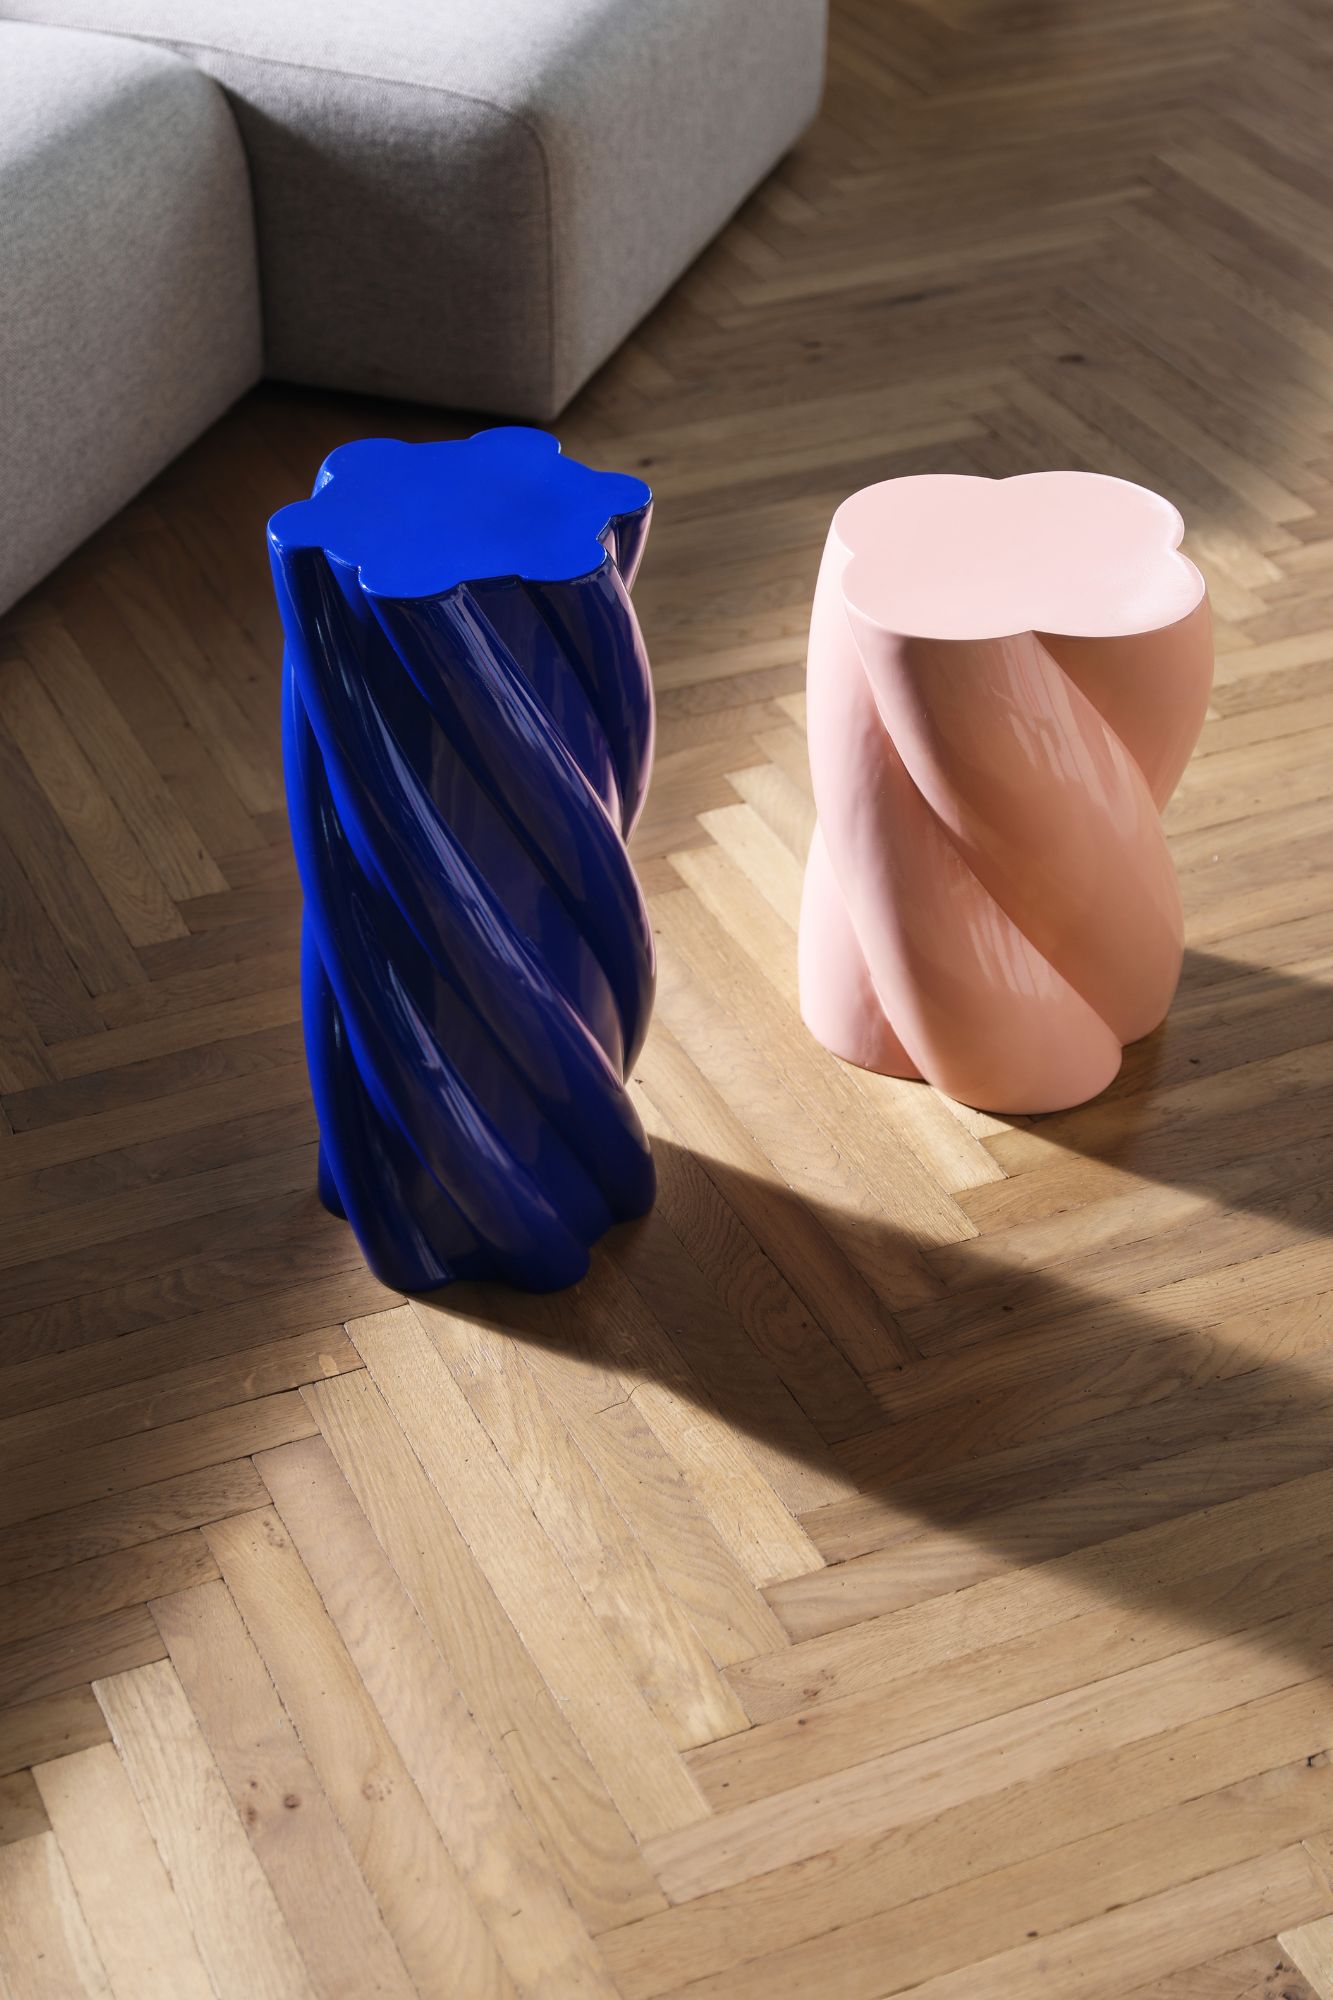 design trade show, “Meta Sensible” Theme Fuses the Physical and Digital Worlds in the Upcoming Maison&Objet